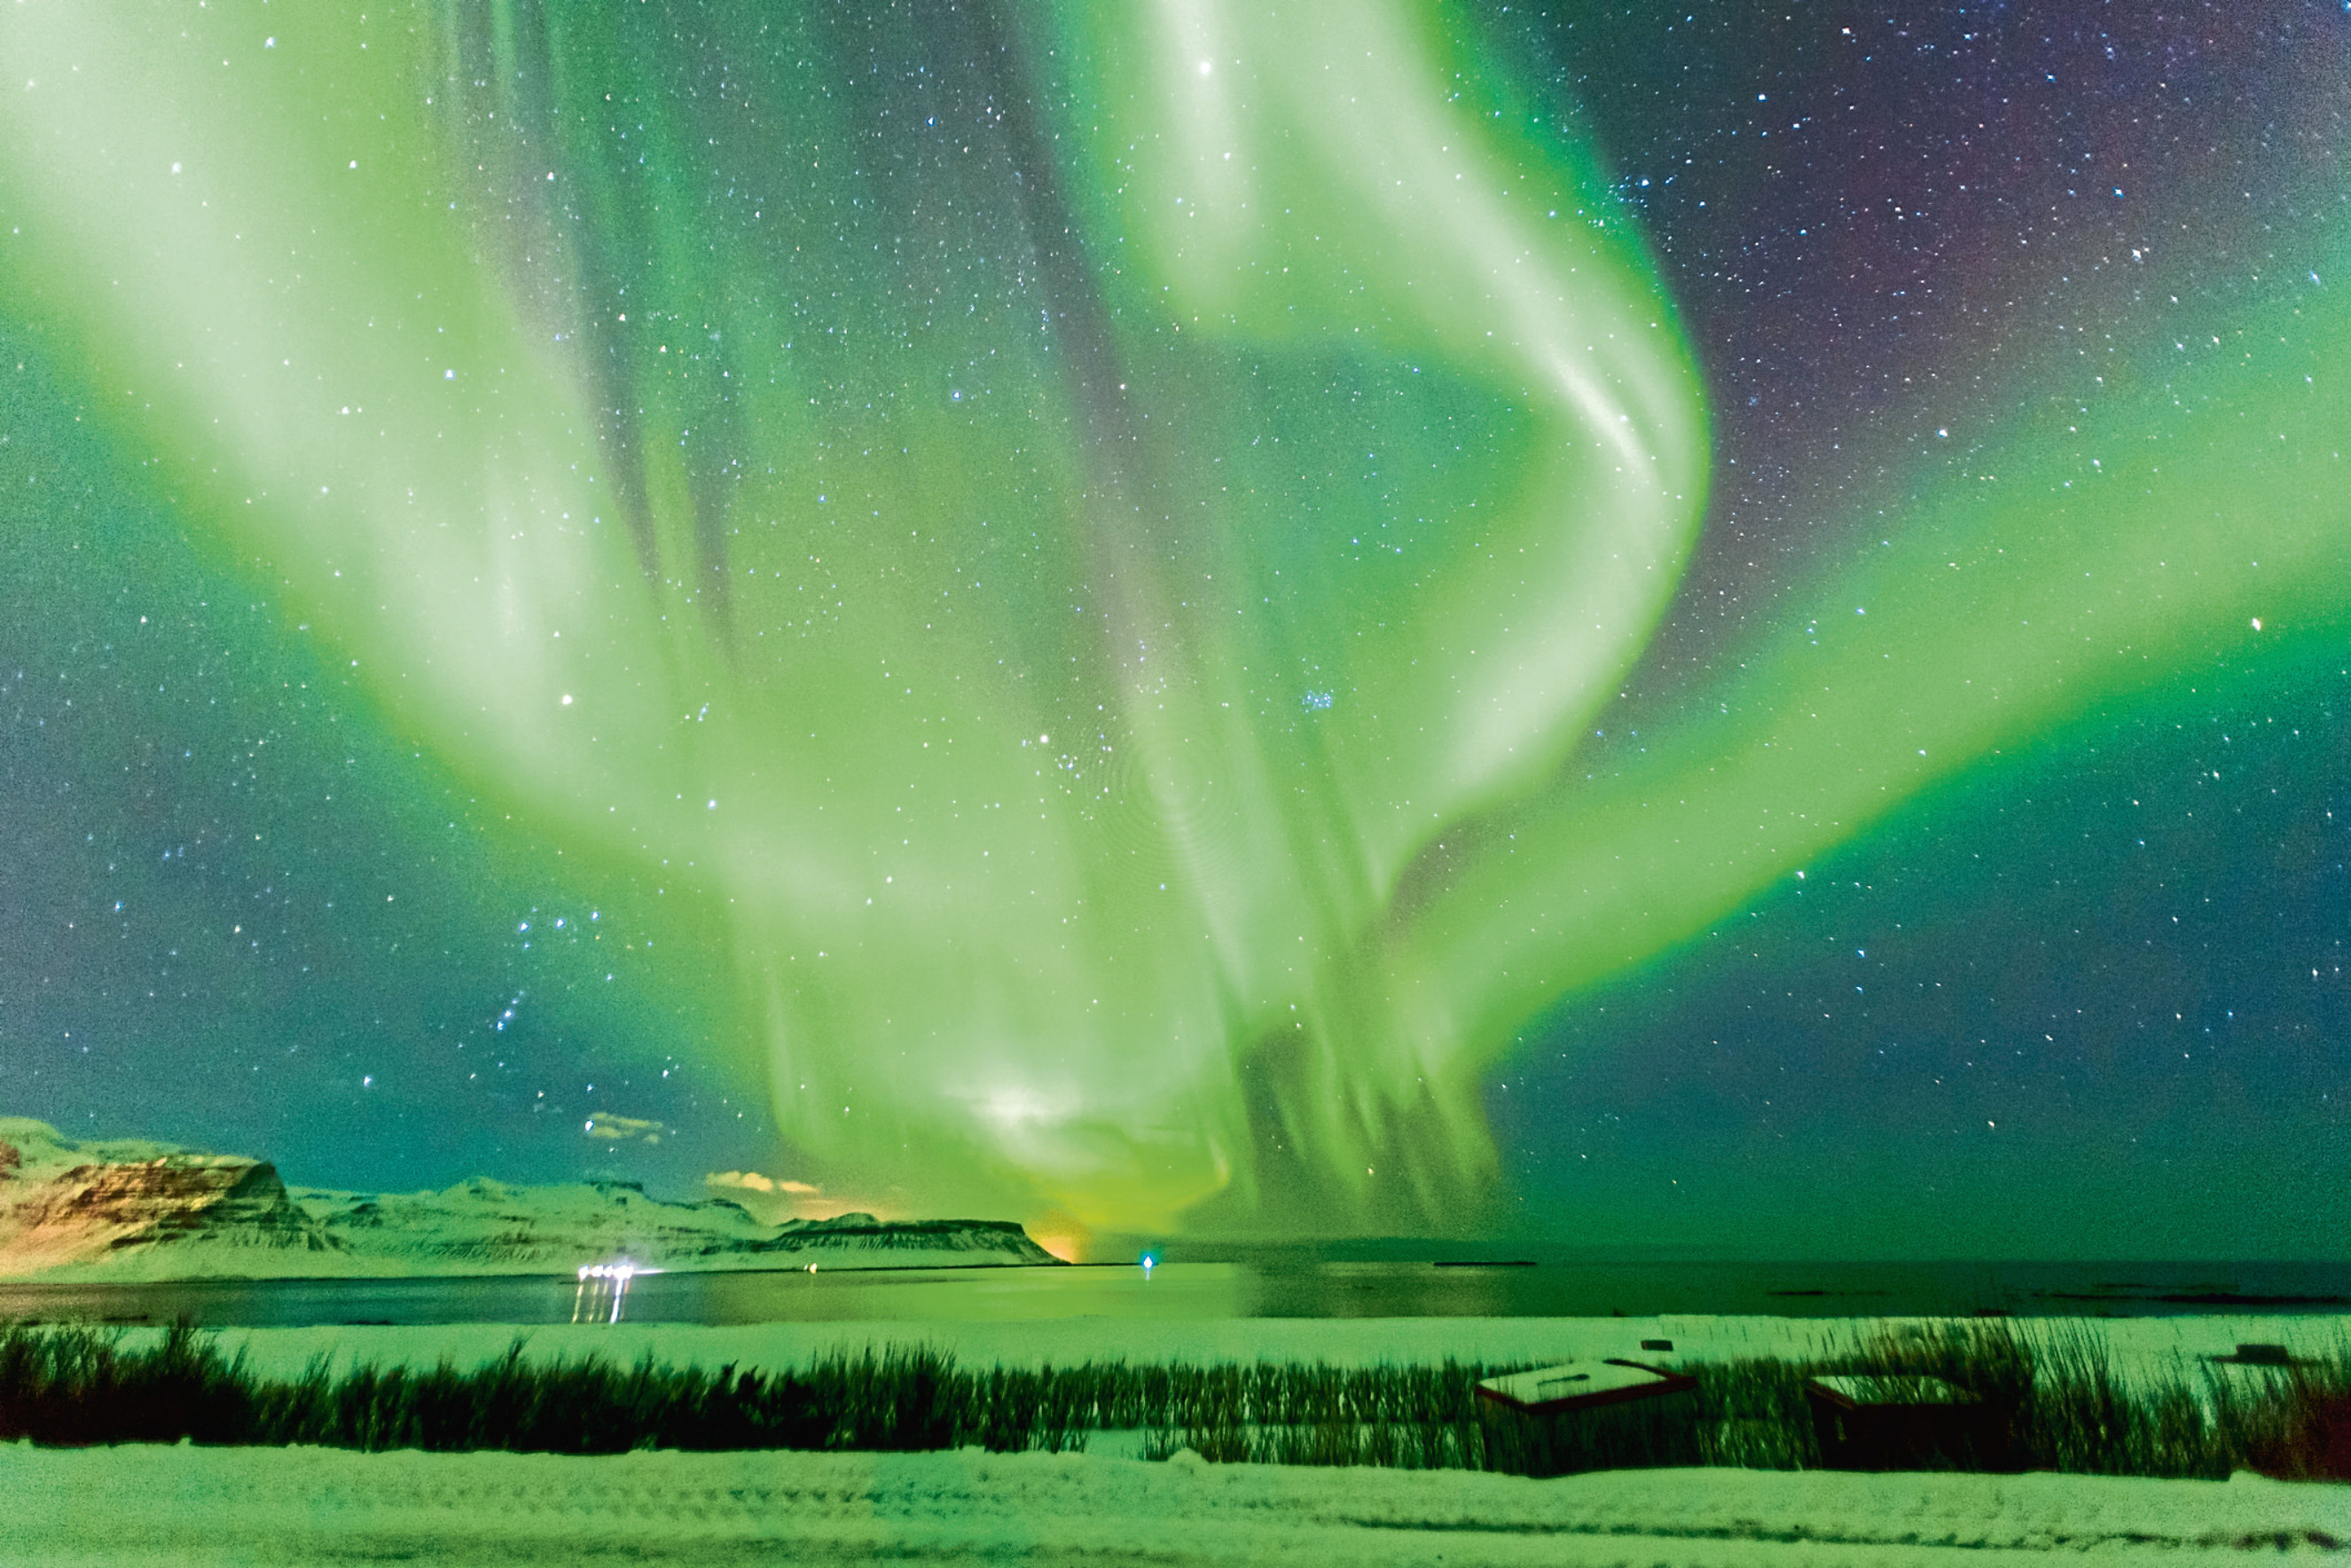 The Aurora Borealis, also known as the Northern Lights, seen above Iceland